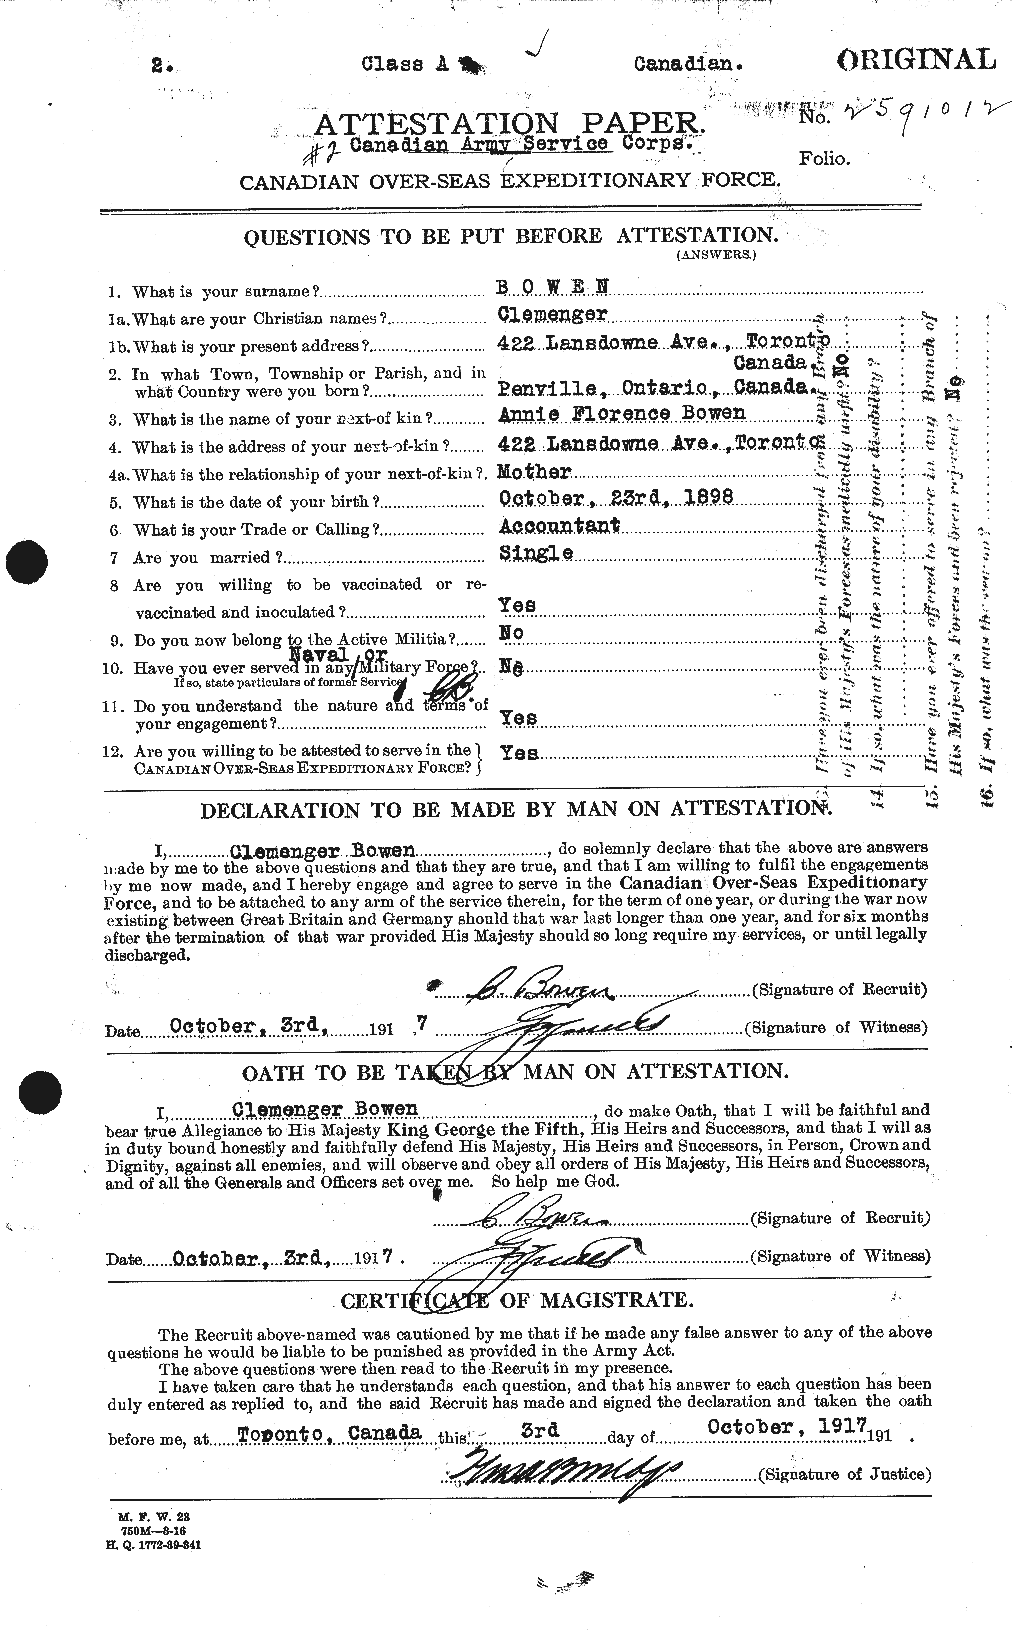 Personnel Records of the First World War - CEF 255369a